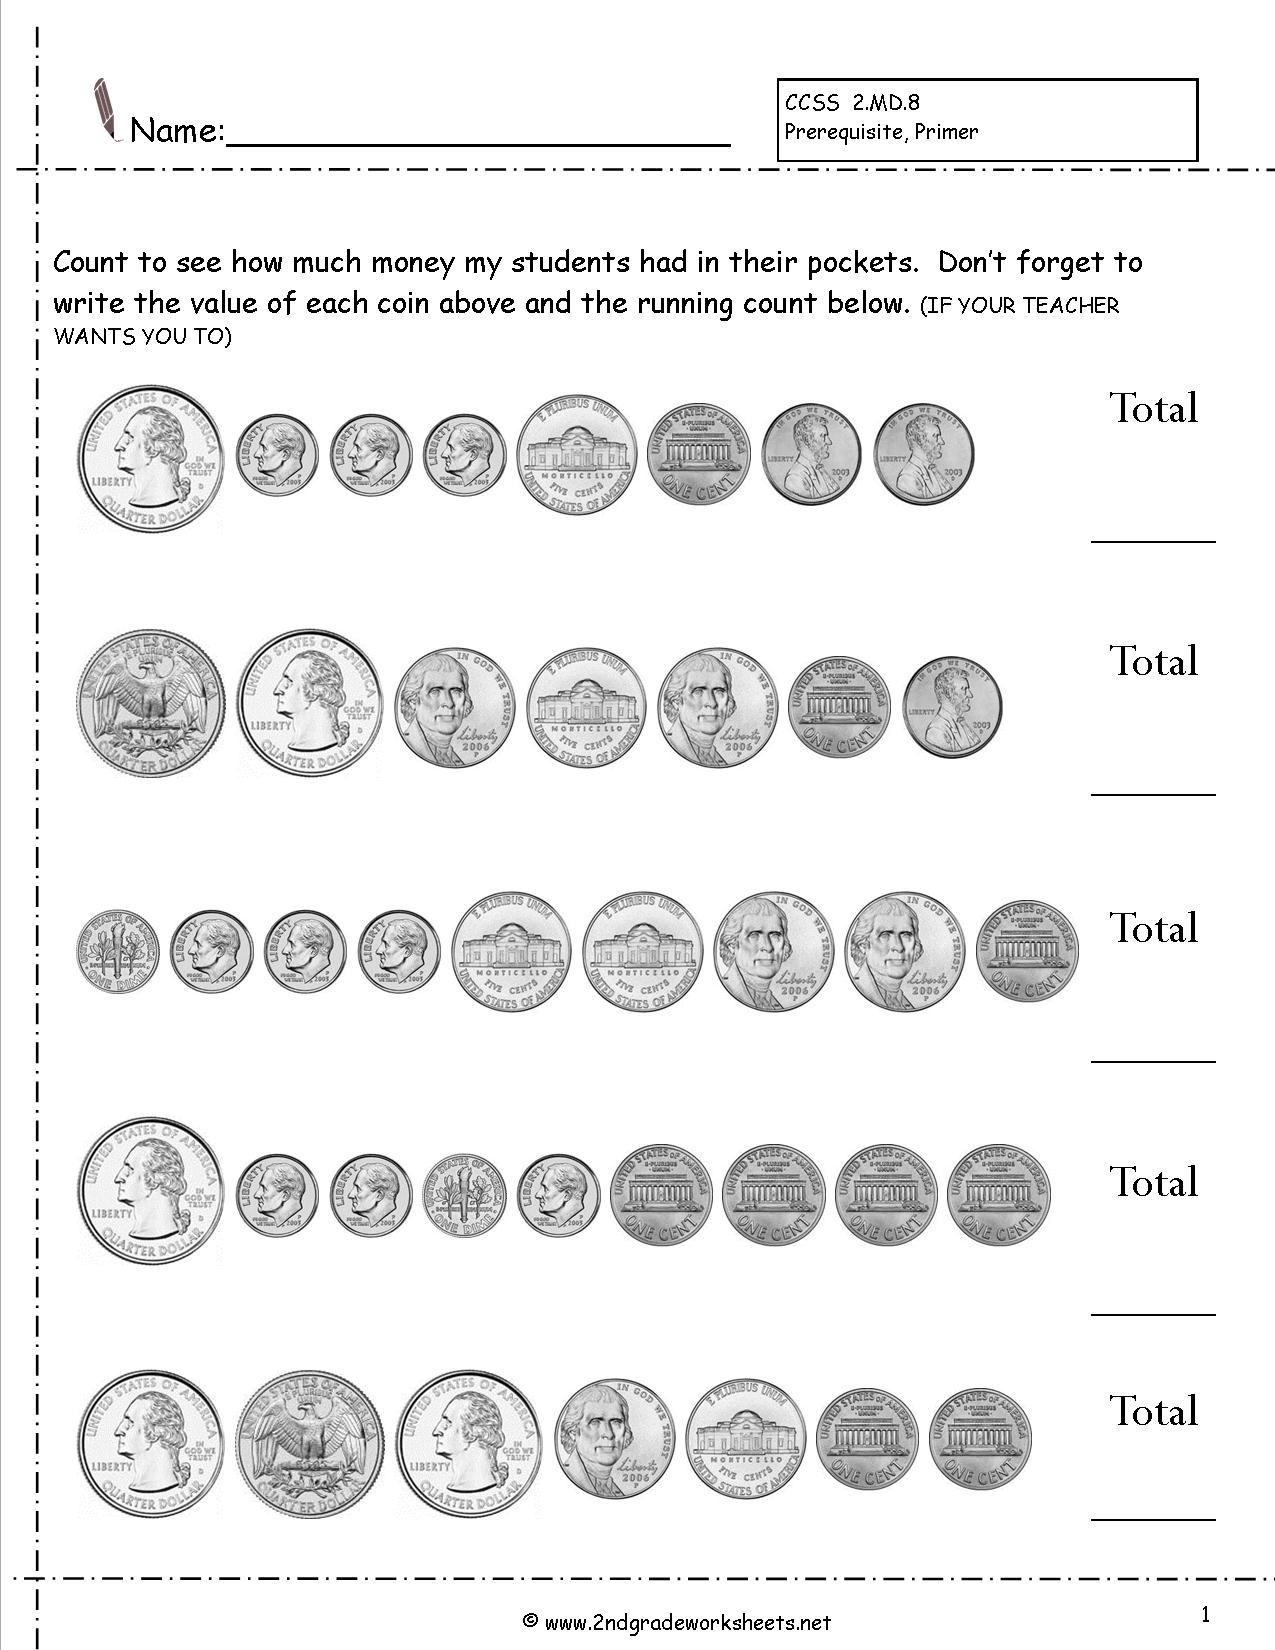 Counting Coins And Money Worksheets And Printouts - Free Printable Money Worksheets